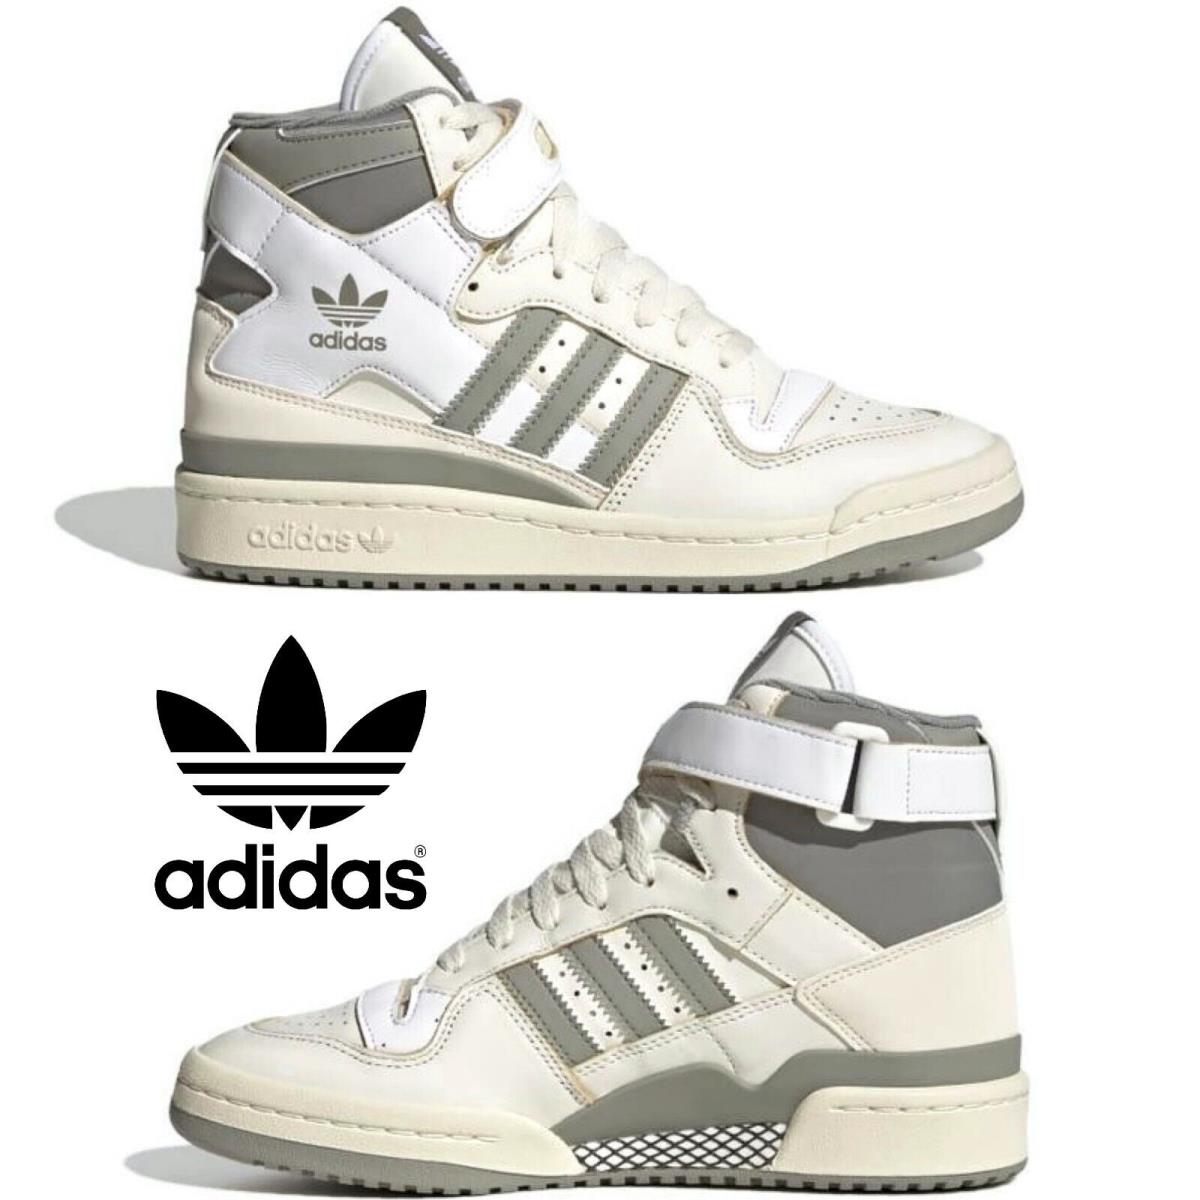 Adidas Originals Forum 84 Hi Shoes Women`s Sneakers Comfort Casual White Silver - White , Off White / Silver Pebble / Cloud White Manufacturer